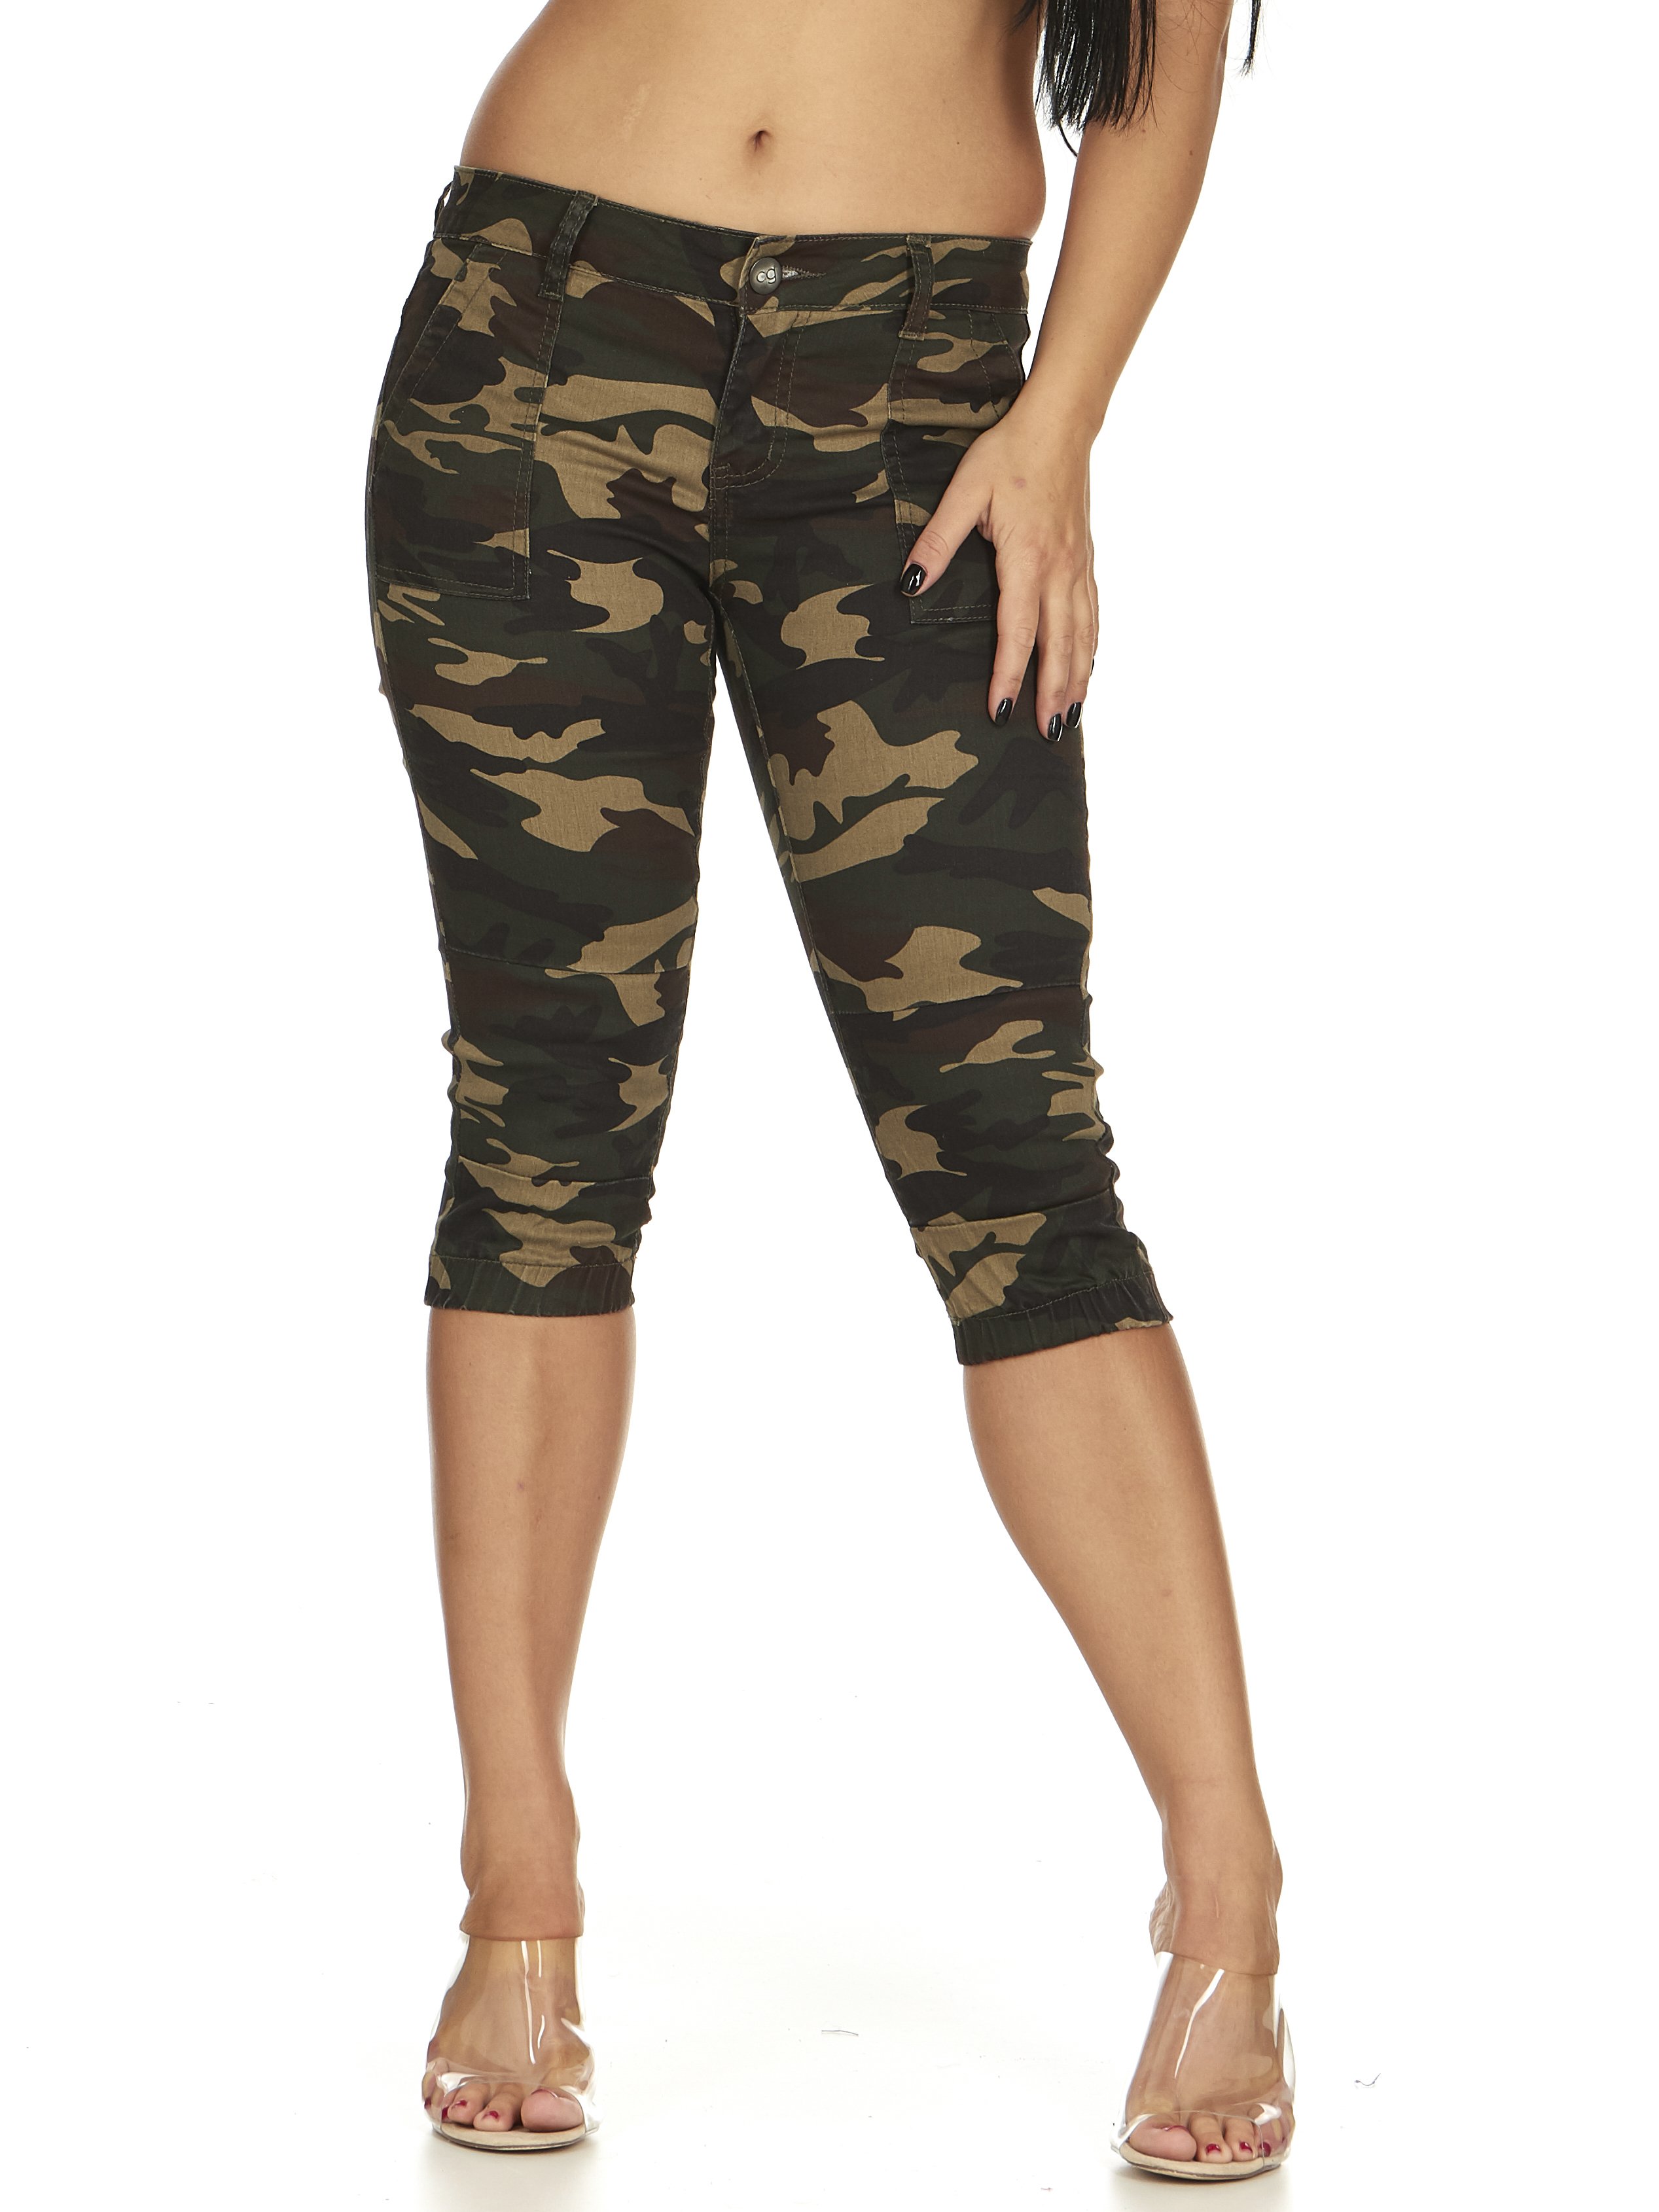 Cute Teen Girl Junior's Plus Size Cute Camo Denim Mid Rise High Waisted Jeans Shorts, Army Button, 16 - image 1 of 7